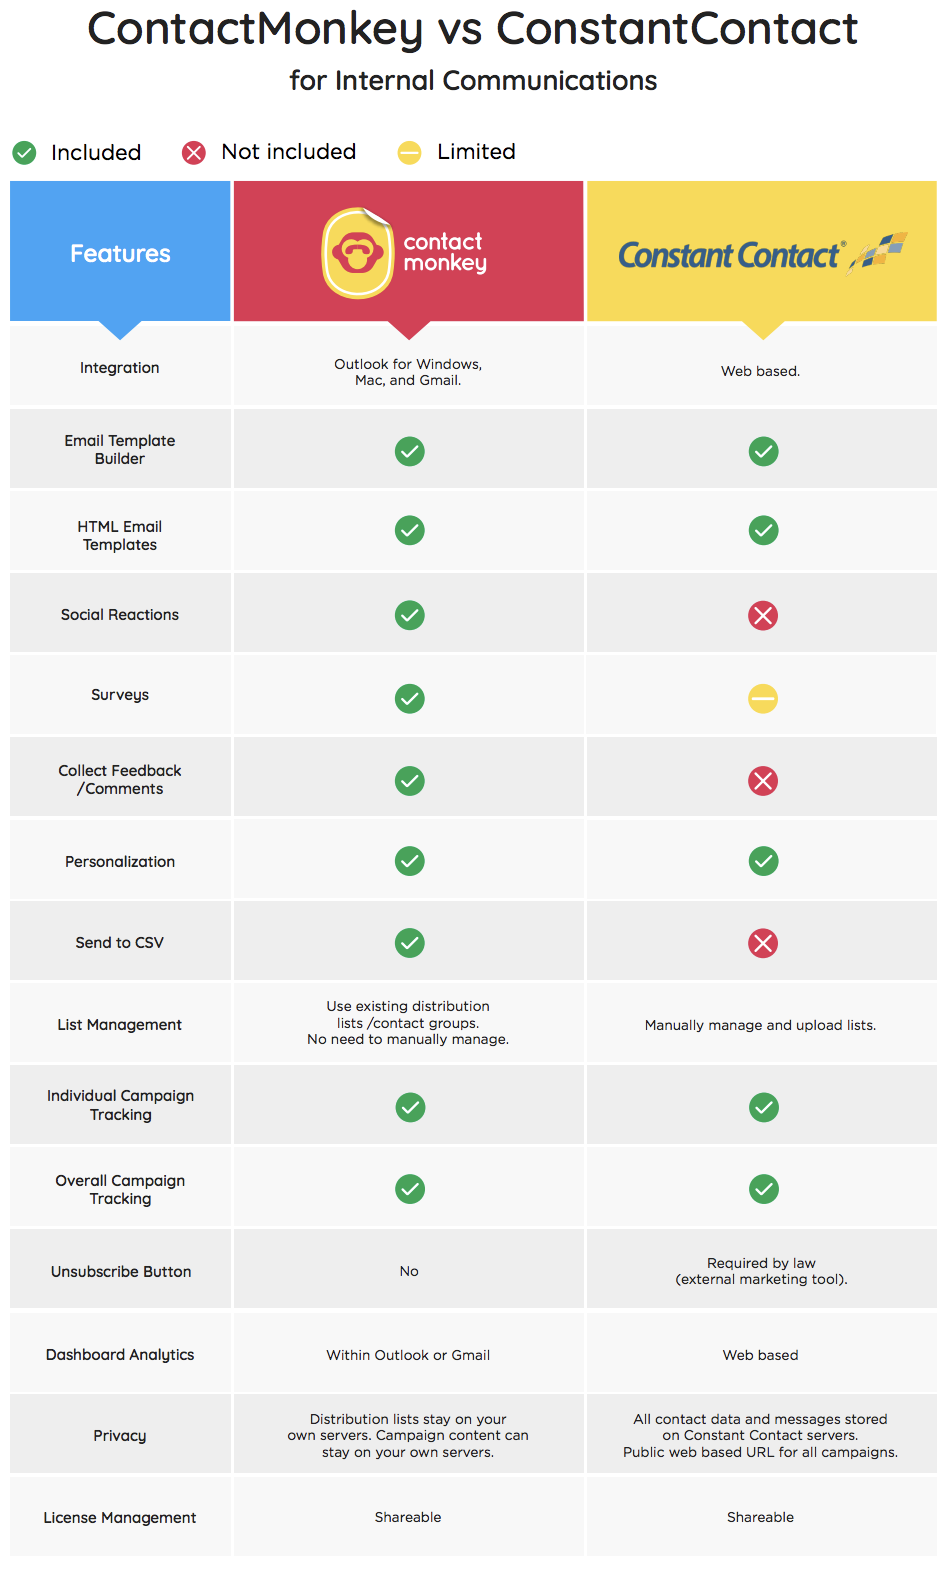 Image of ContactMonkey vs Constant Contact comparison chart for internal communications. 